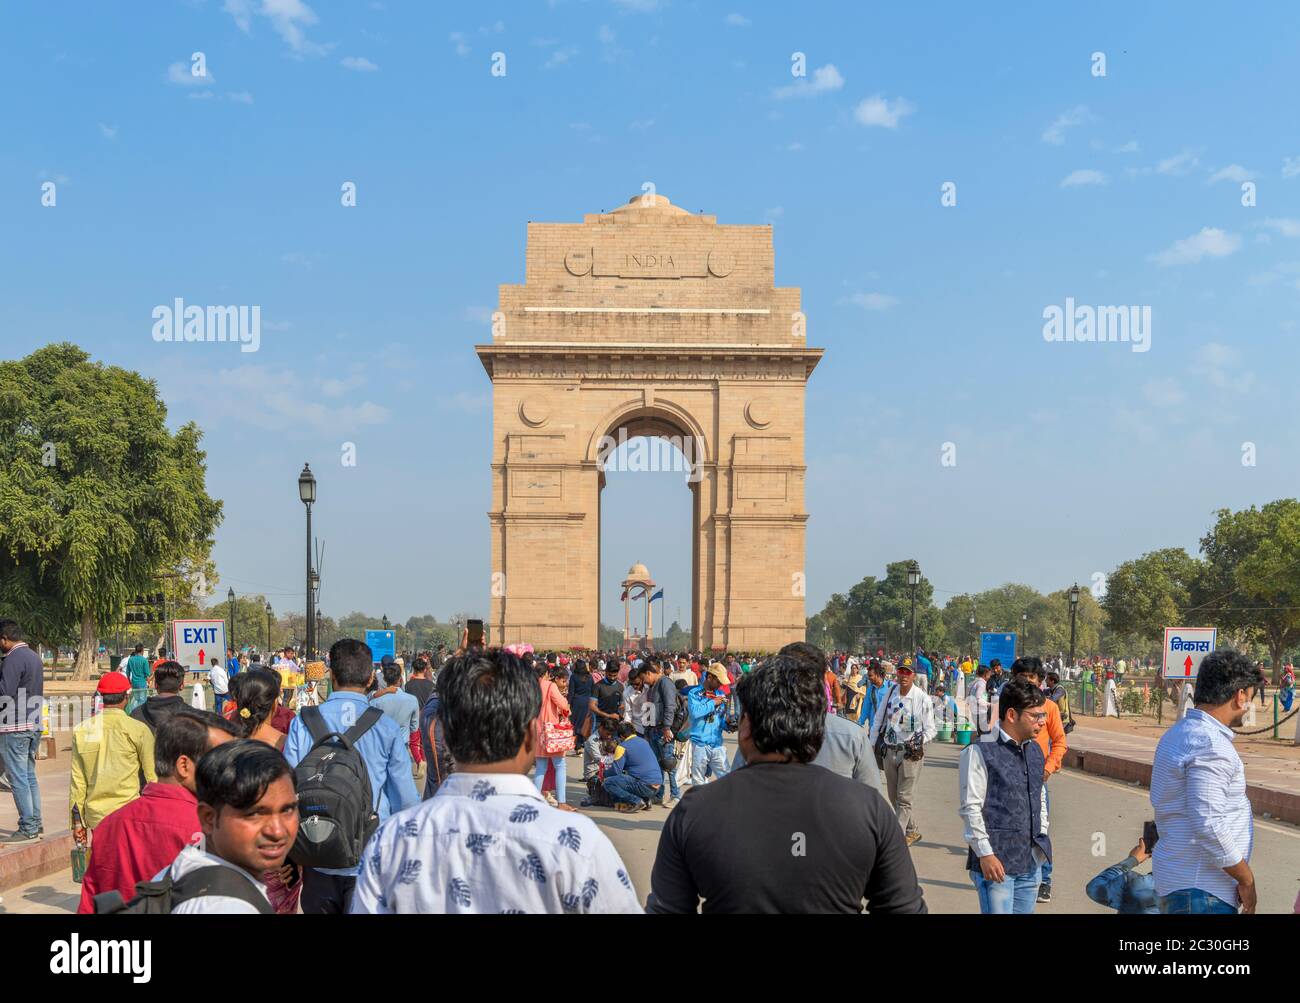 Crowds of people in front of the India Gate, Rajpath, New Delhi, Delhi, India Stock Photo